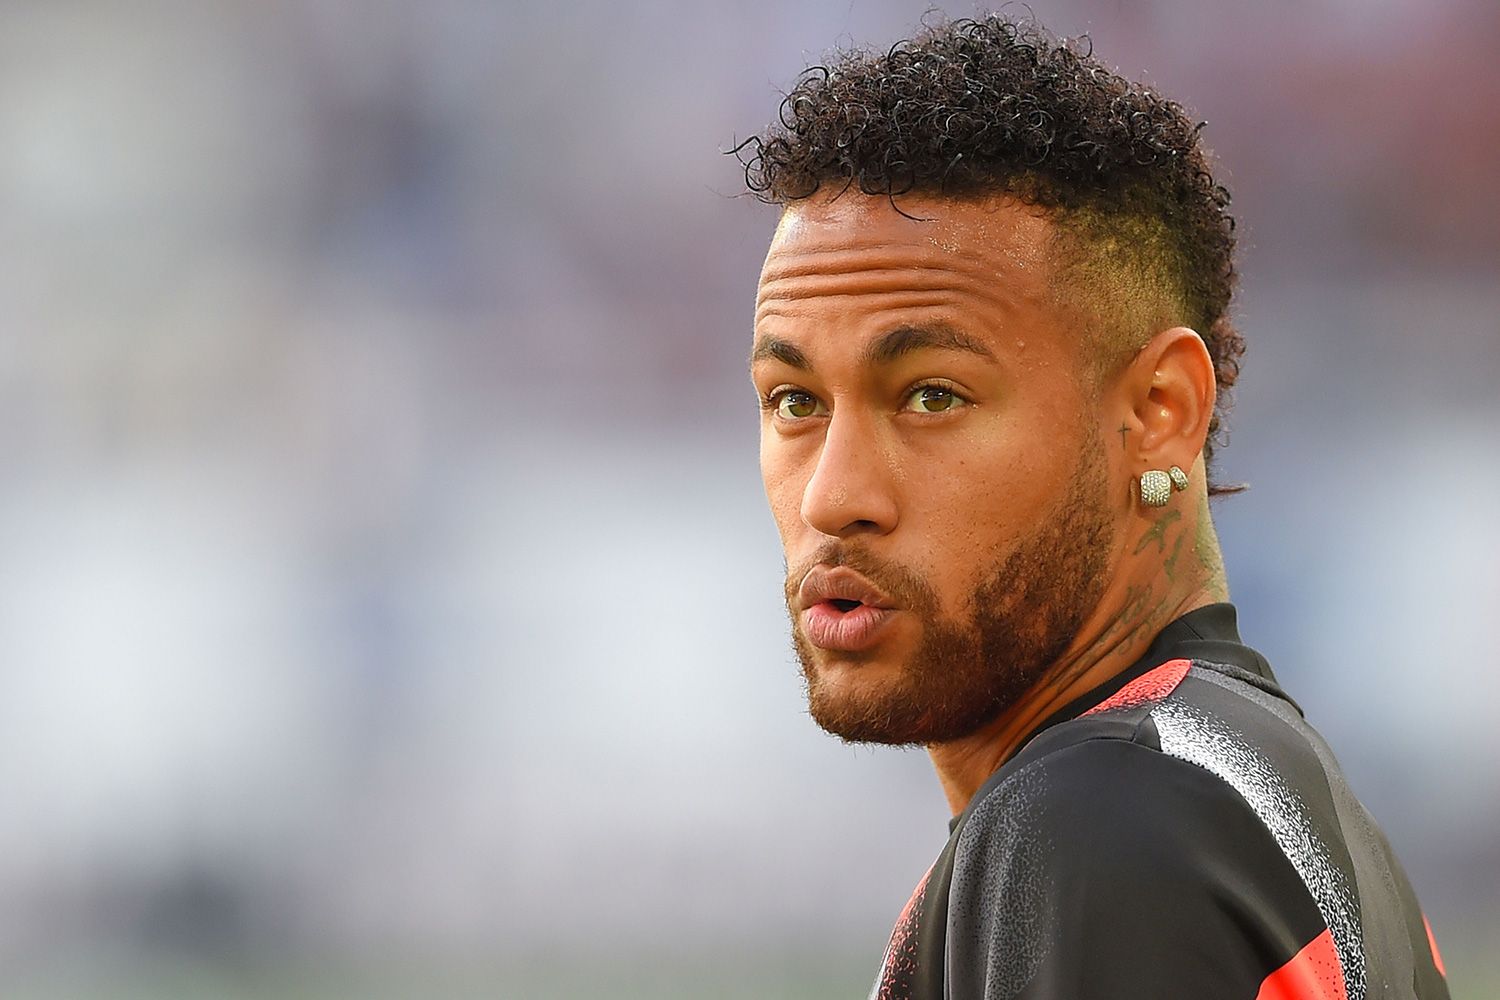 Is the Hair of Neymar Straight or Curly? - The Lifestyle Blog for Modern  Men & their Hair by Curly Rogelio